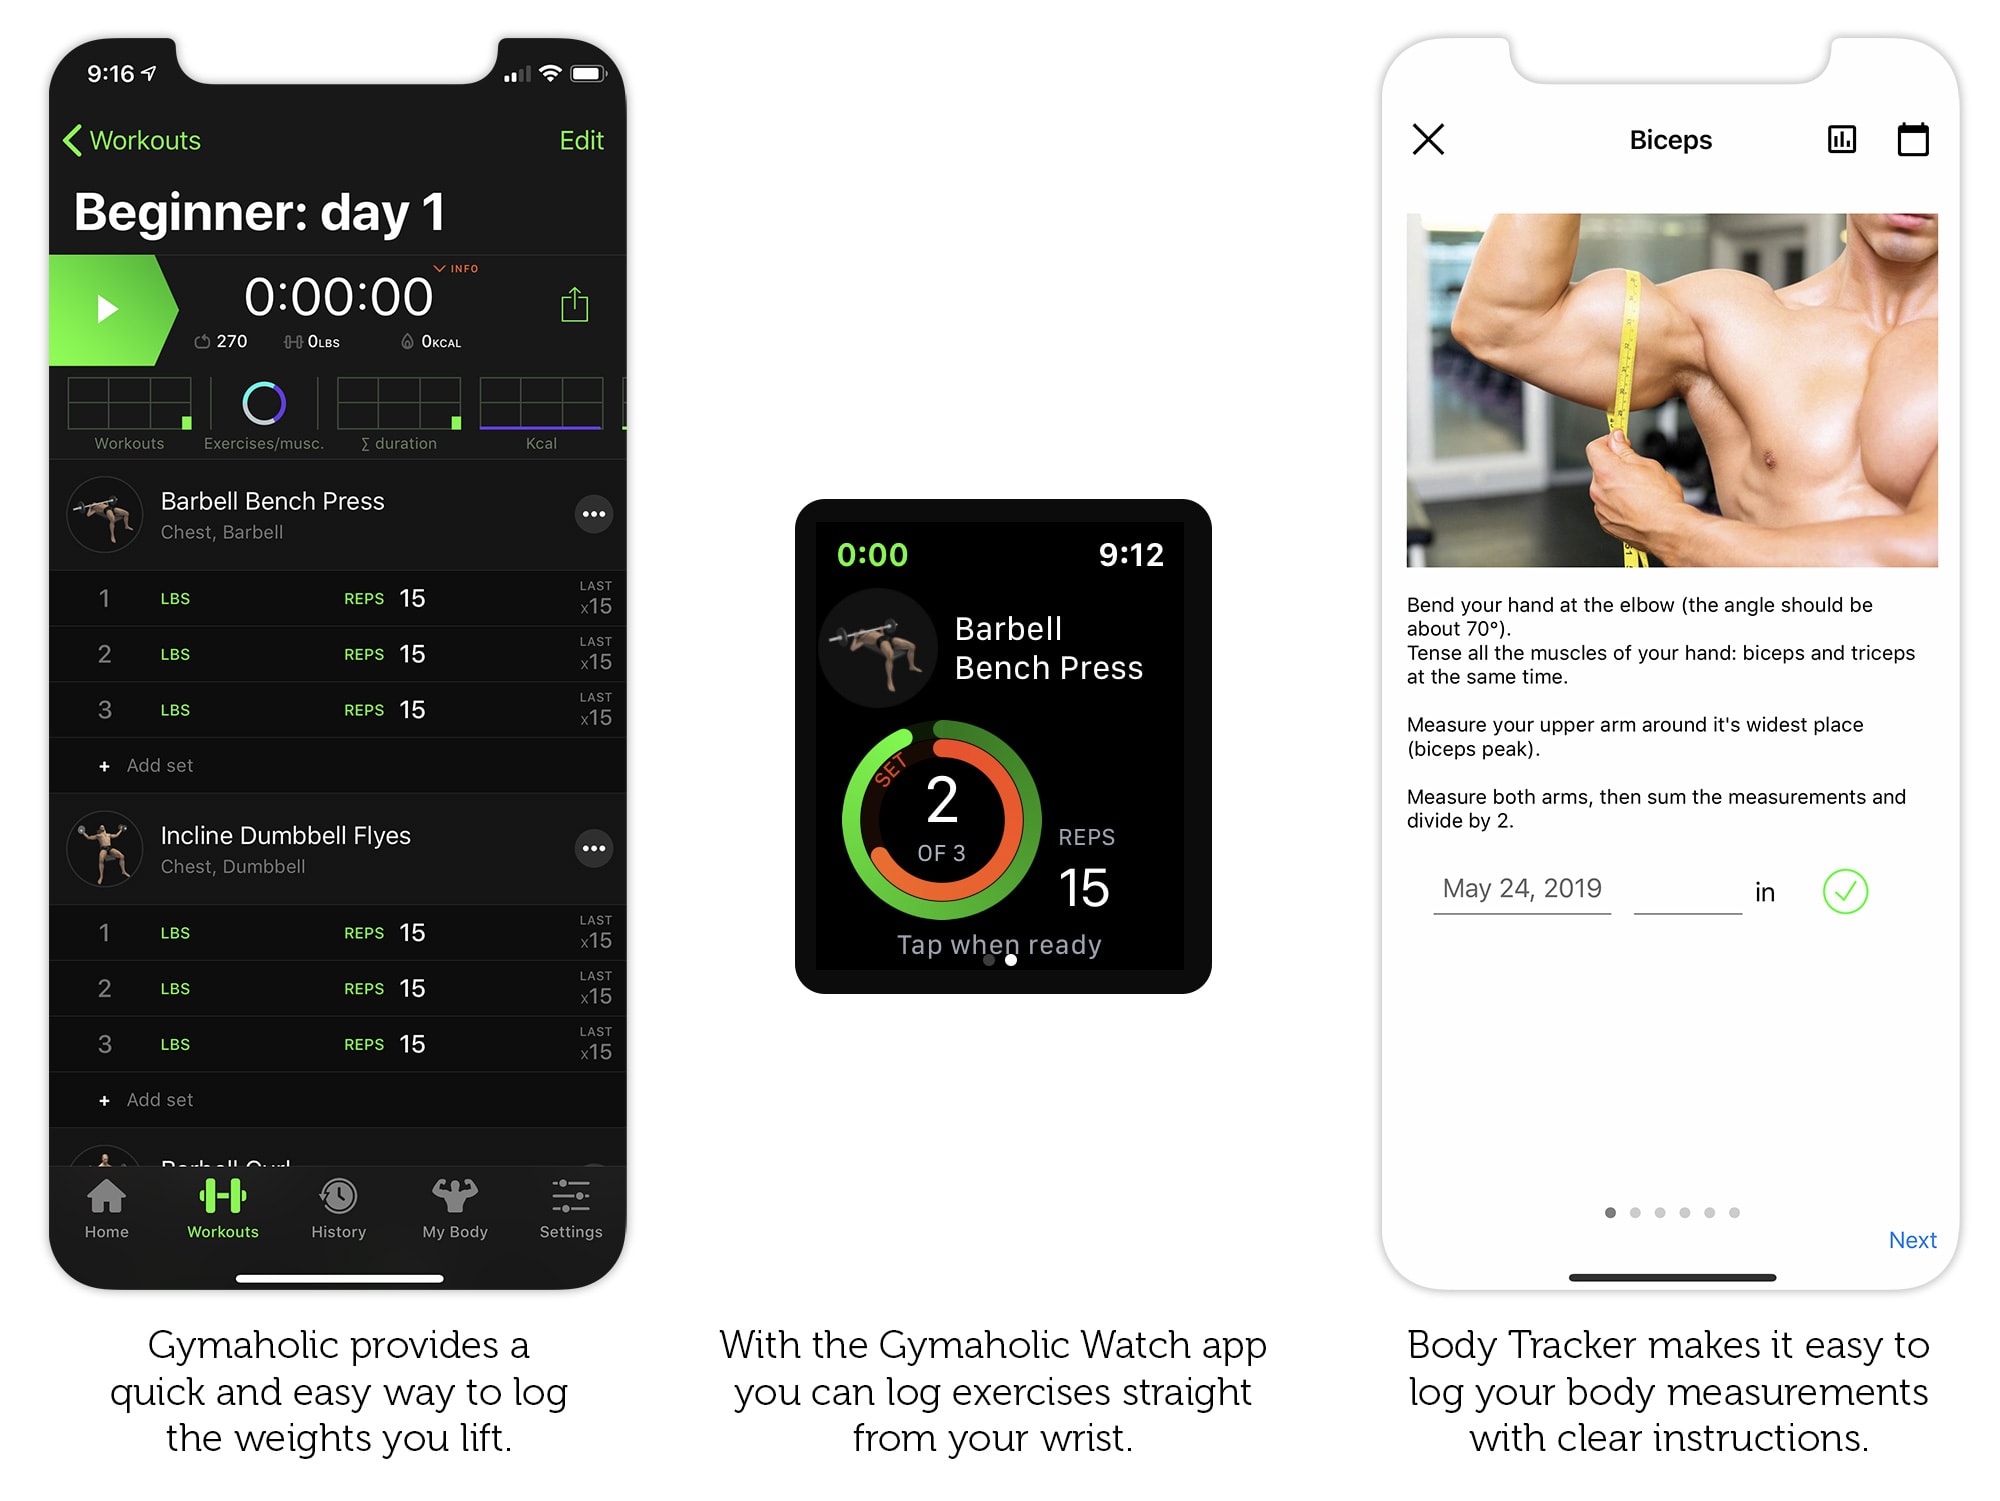 Log your progress with Gymaholic and Body Tracker